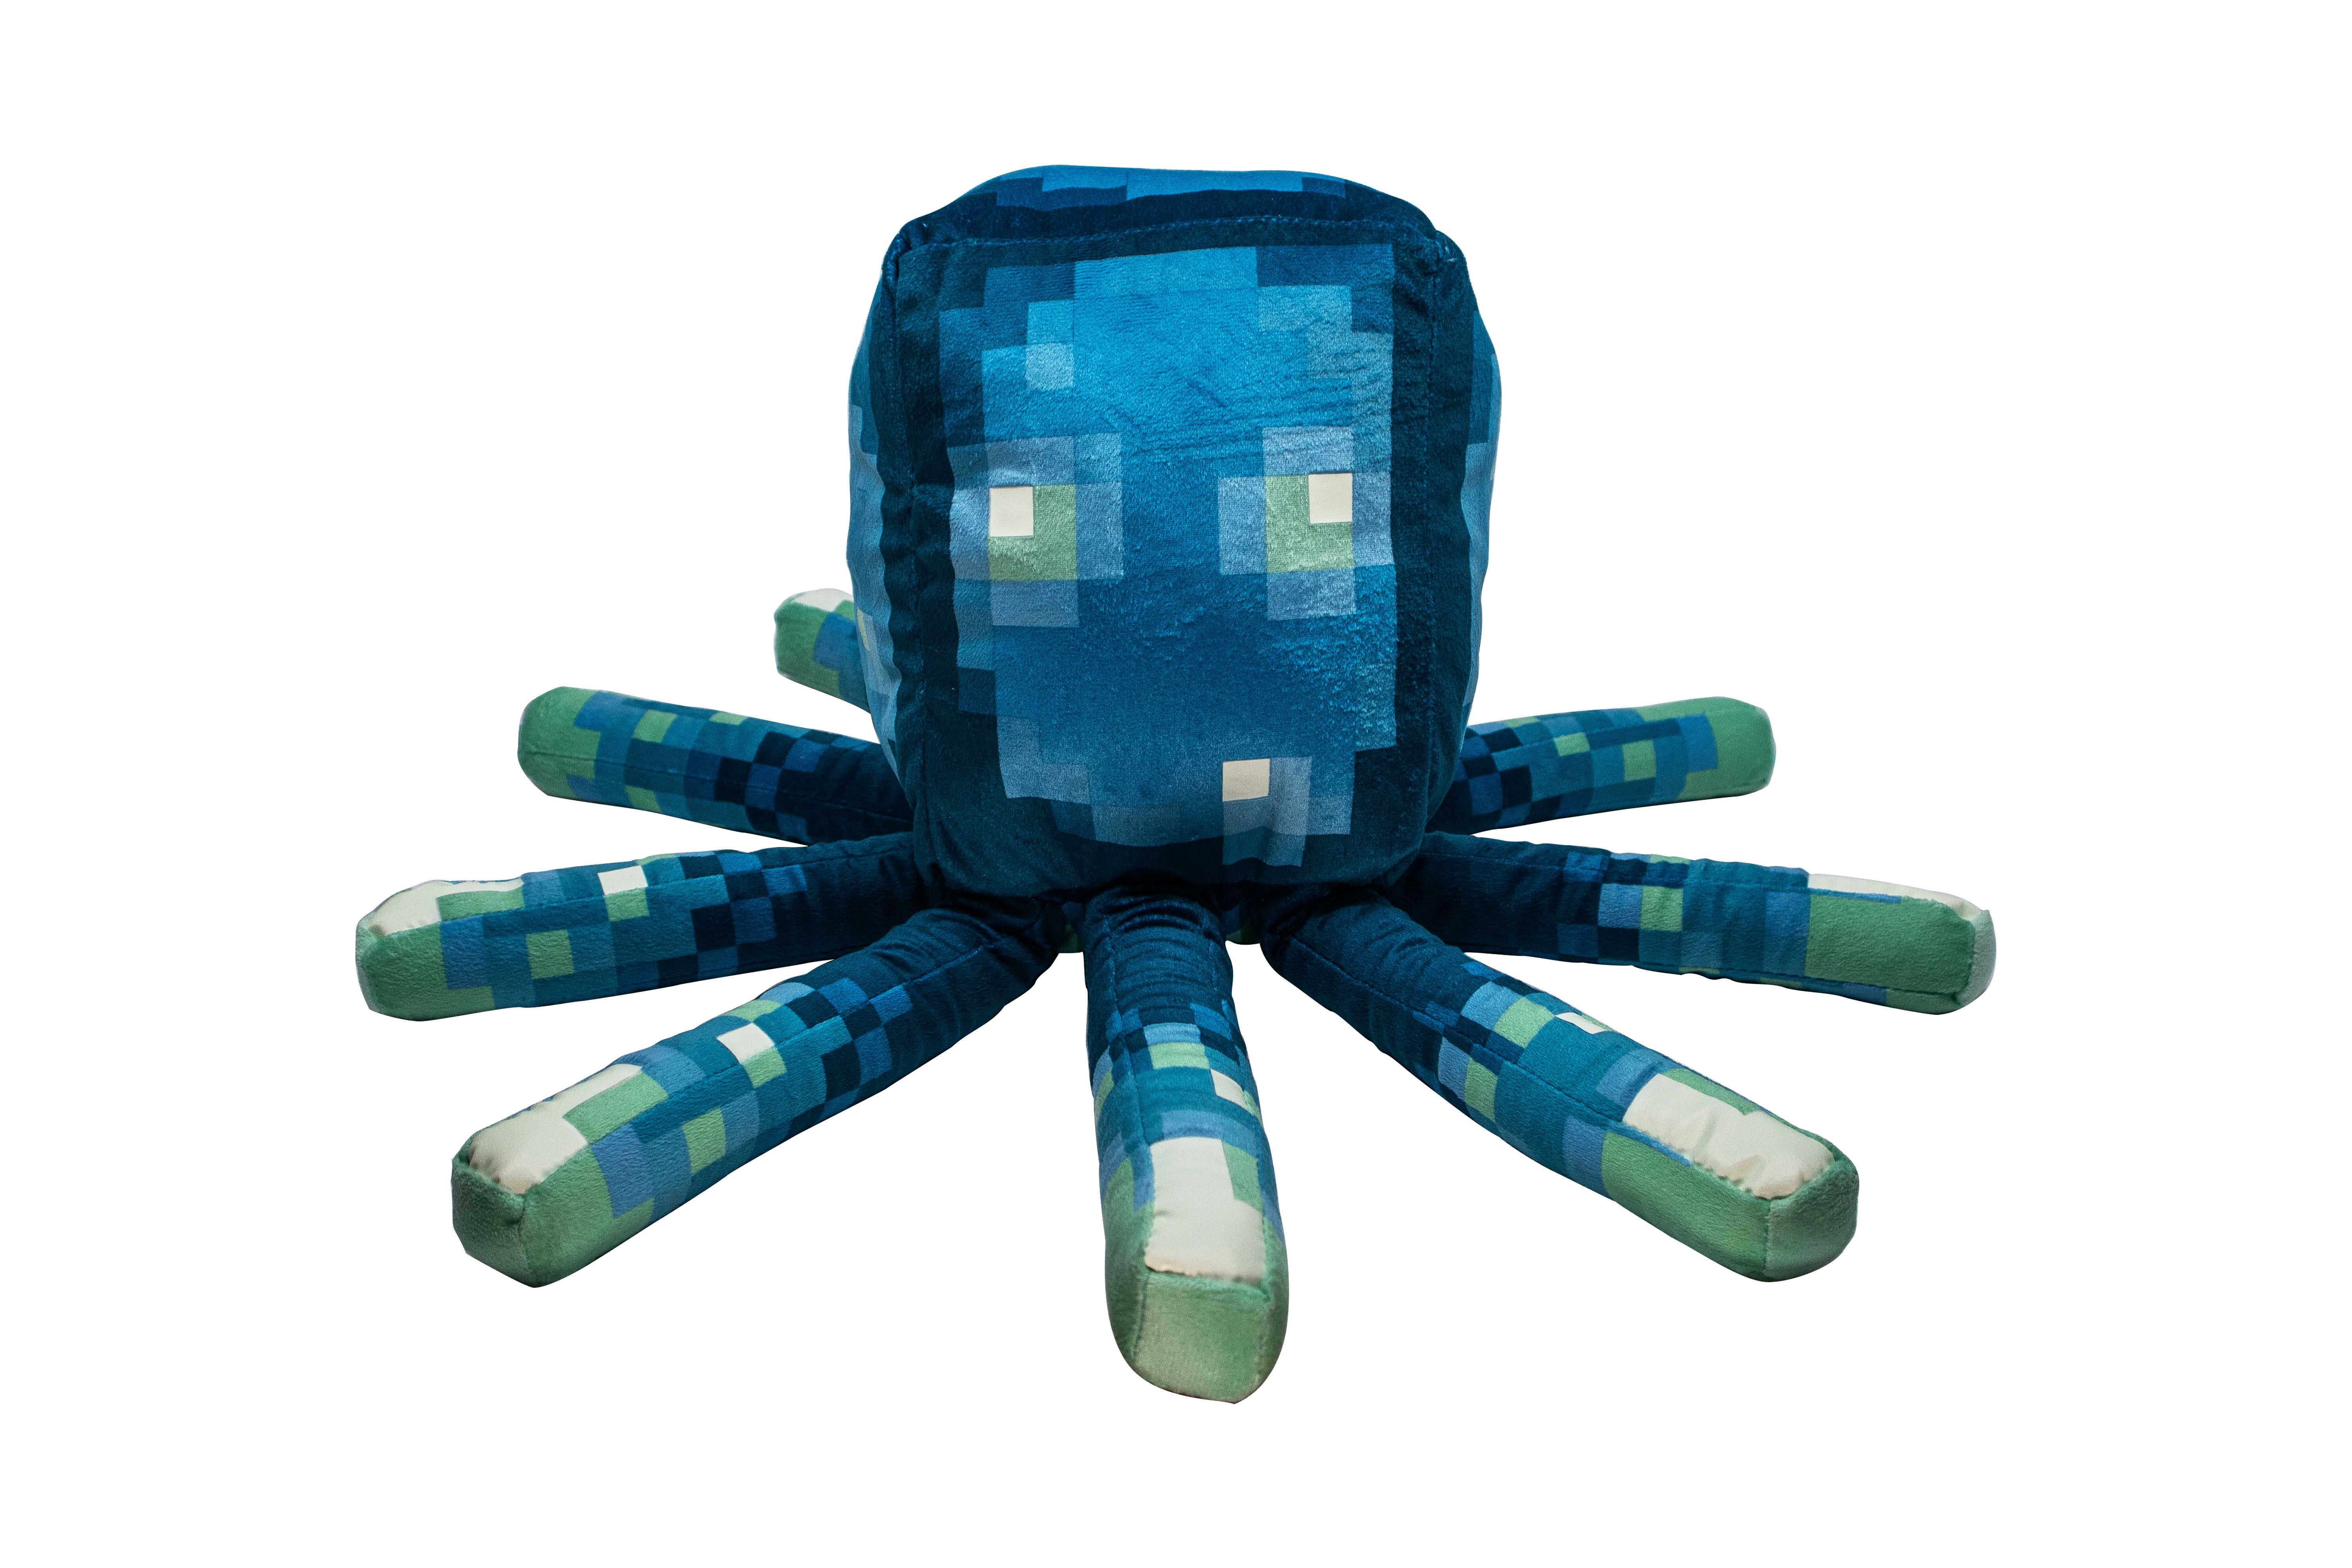 Minecraft Squid Kids Bedding Plush Cuddle and Decorative Glow In The Dark Pillow Buddy, Microfiber, Blue, Mojang, Gaming Bedding